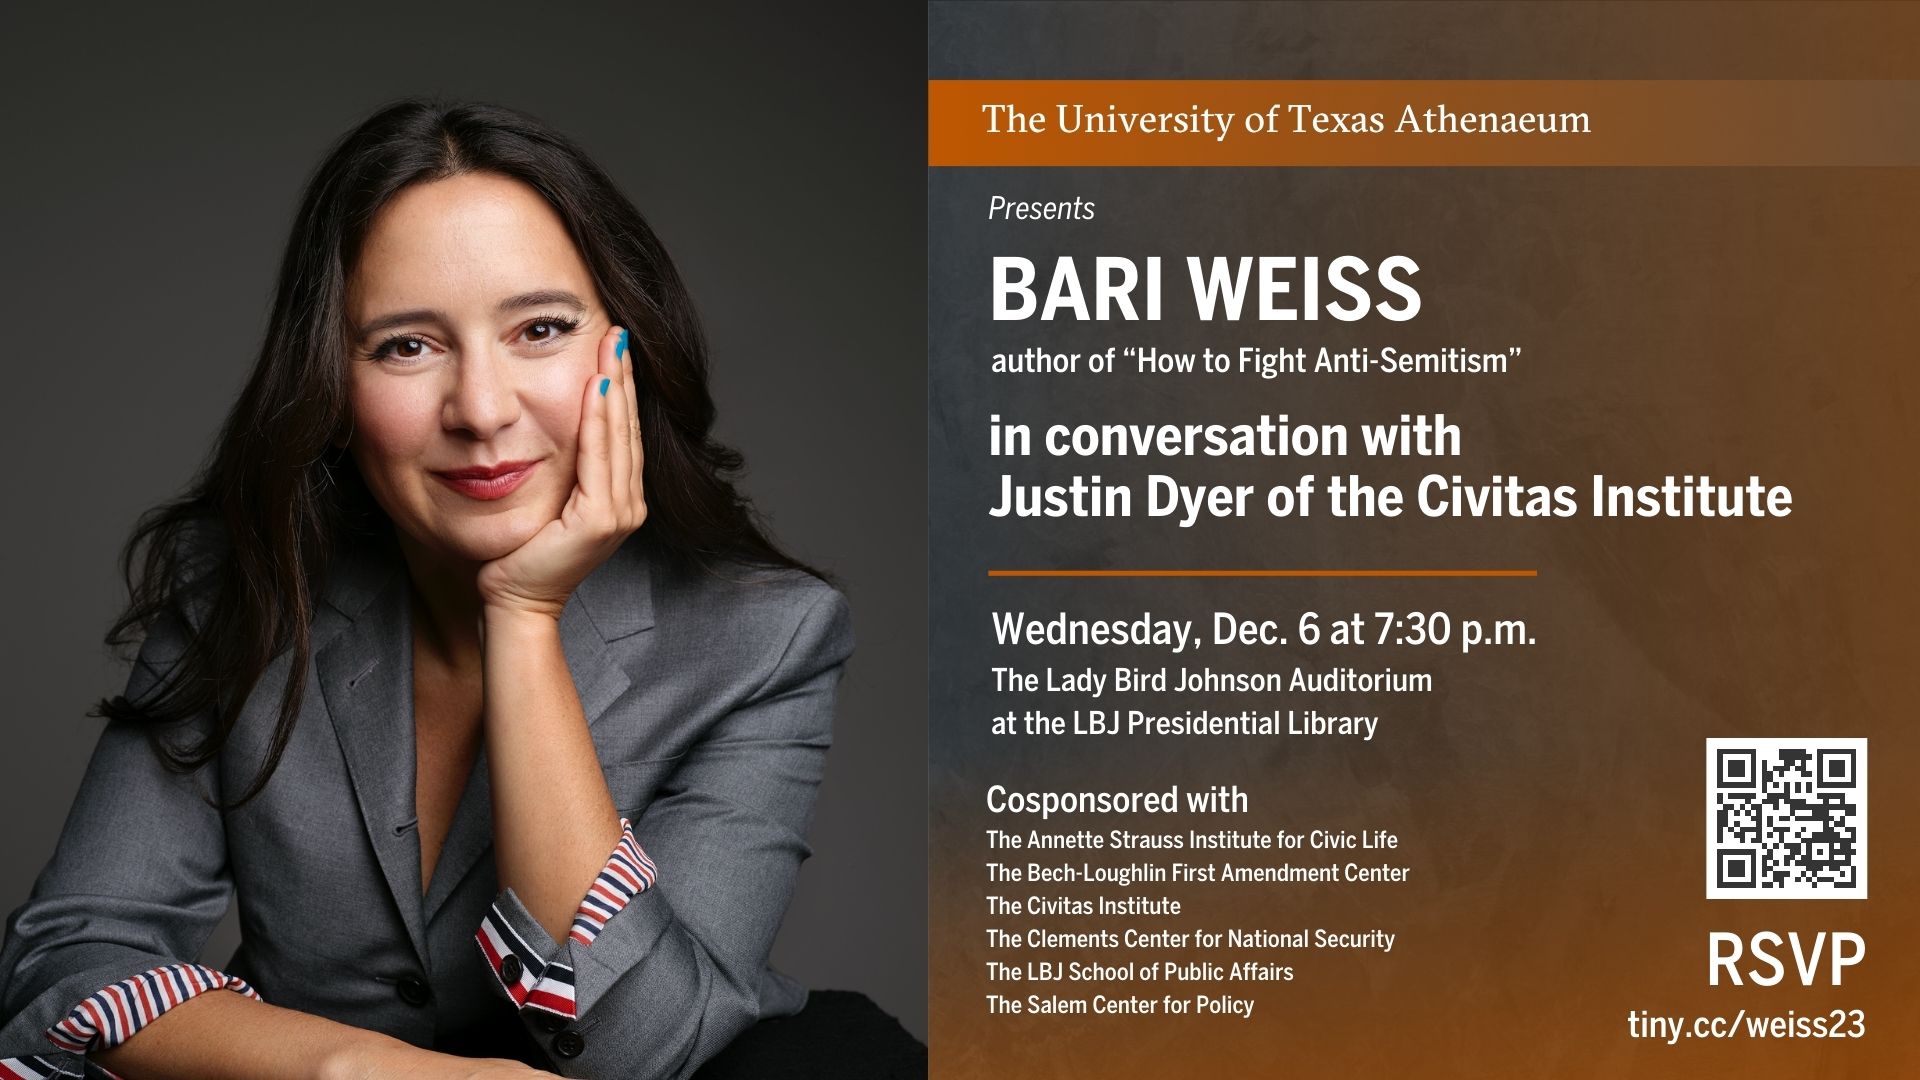 The University of Texas Athenaeum presents BARI WEISS author of How to Fight Anti-Semitism in conversation with Justin Dyer of The Civitas Institute Wednesday, Dec. 6 at 7:30 p.m. The Lady Bird Johnson Auditorium at the LBJ Presidential Library Cosponsored by: The Bech-Loughlin First Amendment Center The Civitas Institute The Clements Center for National Security The Salem Center for Policy The LBJ School of Public Affairs The Annette Strauss Institute for Civic Life